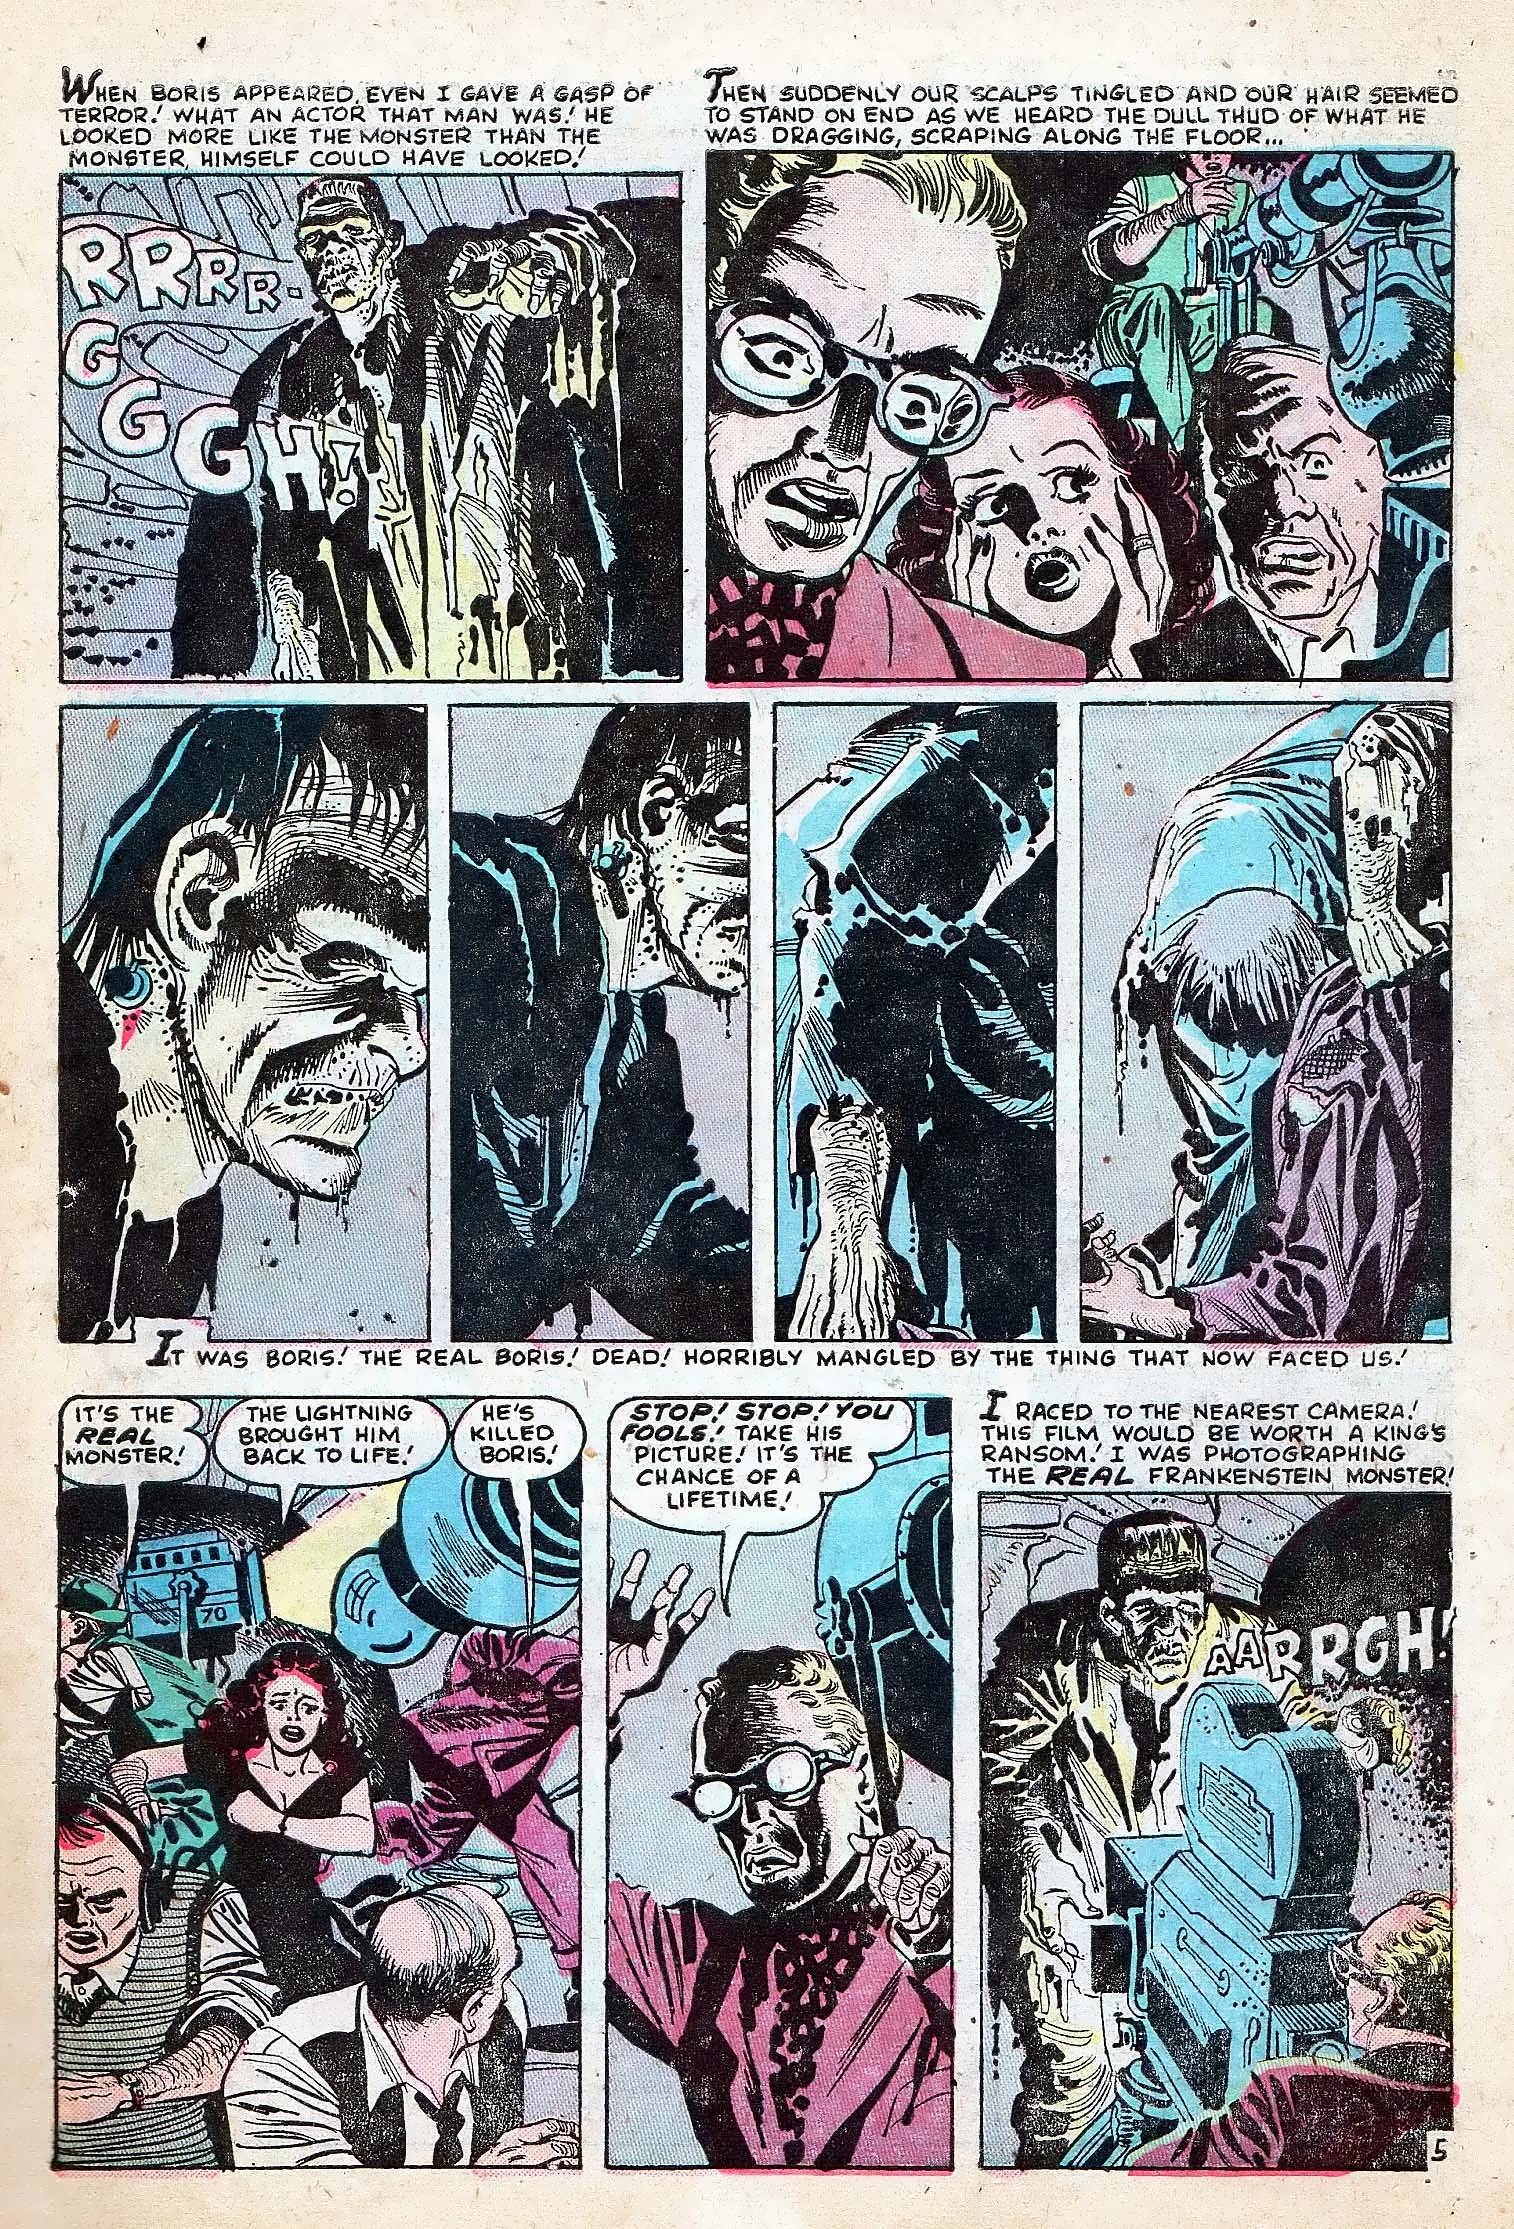 Marvel Tales (1949) 106 Page 6